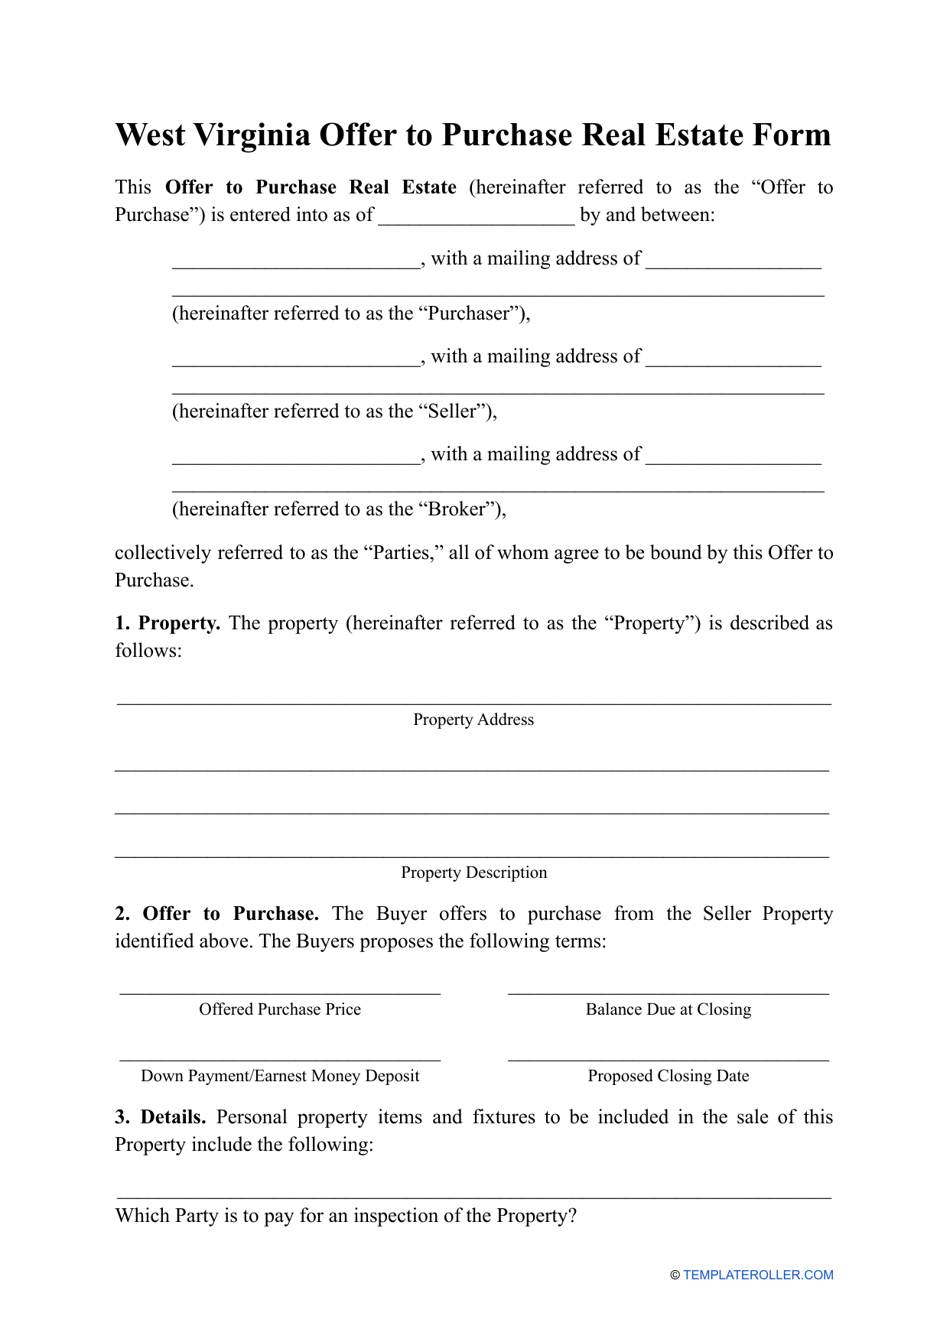 Offer to Purchase Real Estate Form - West Virginia, Page 1